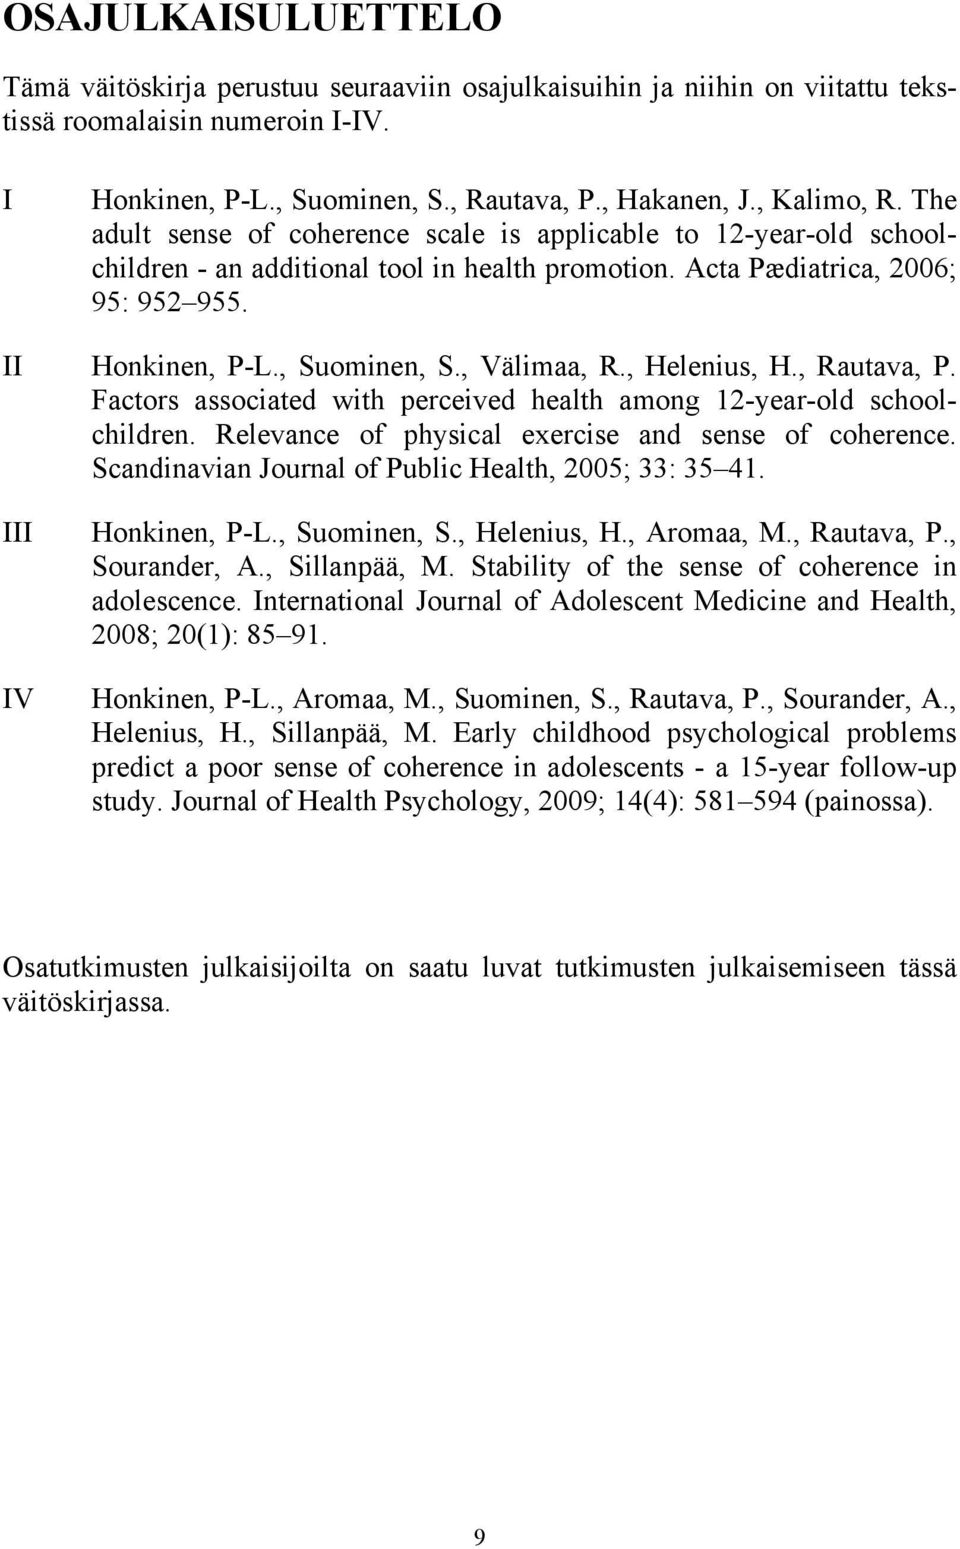 , Välimaa, R., Helenius, H., Rautava, P. Factors associated with perceived health among 12-year-old schoolchildren. Relevance of physical exercise and sense of coherence.